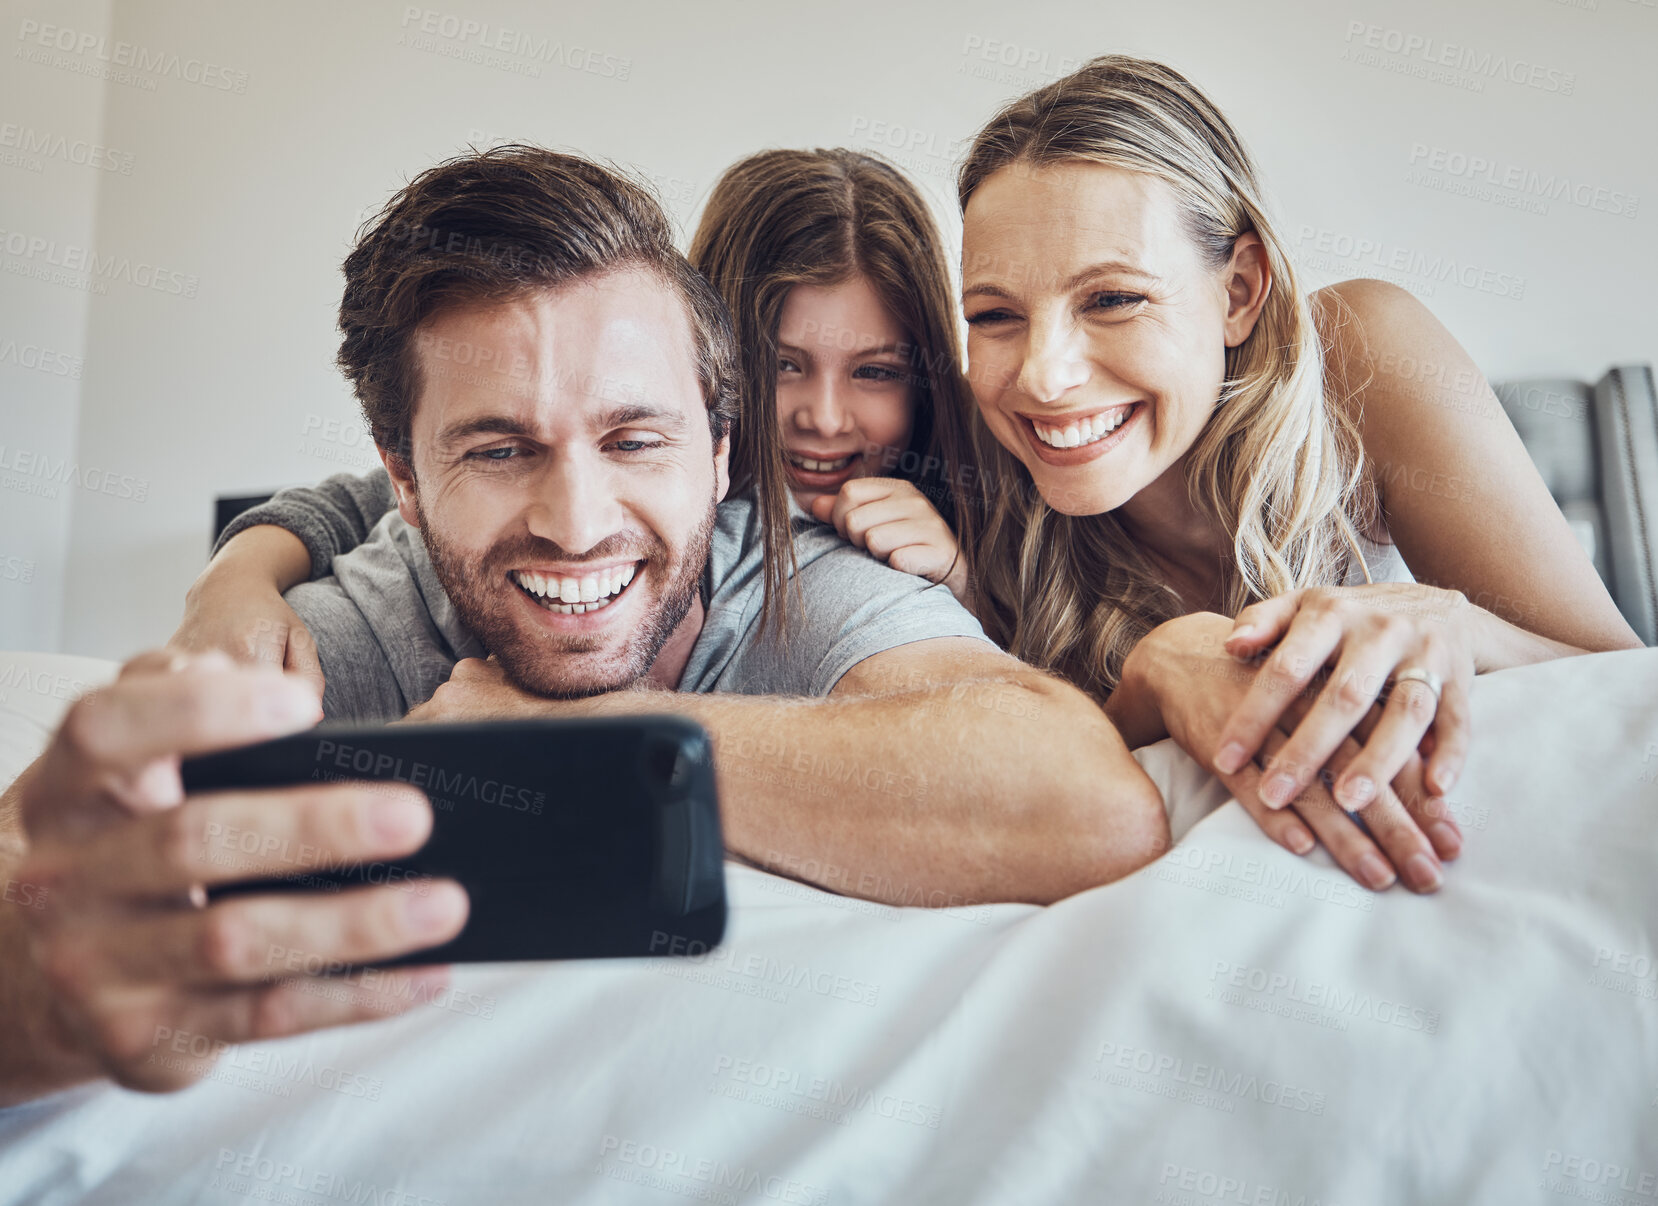 Buy stock photo Portrait, relax or parents take a selfie with a girl as a happy family in house bedroom bonding in Berlin. Mother, father or child relaxing together enjoying quality time or taking pictures at home